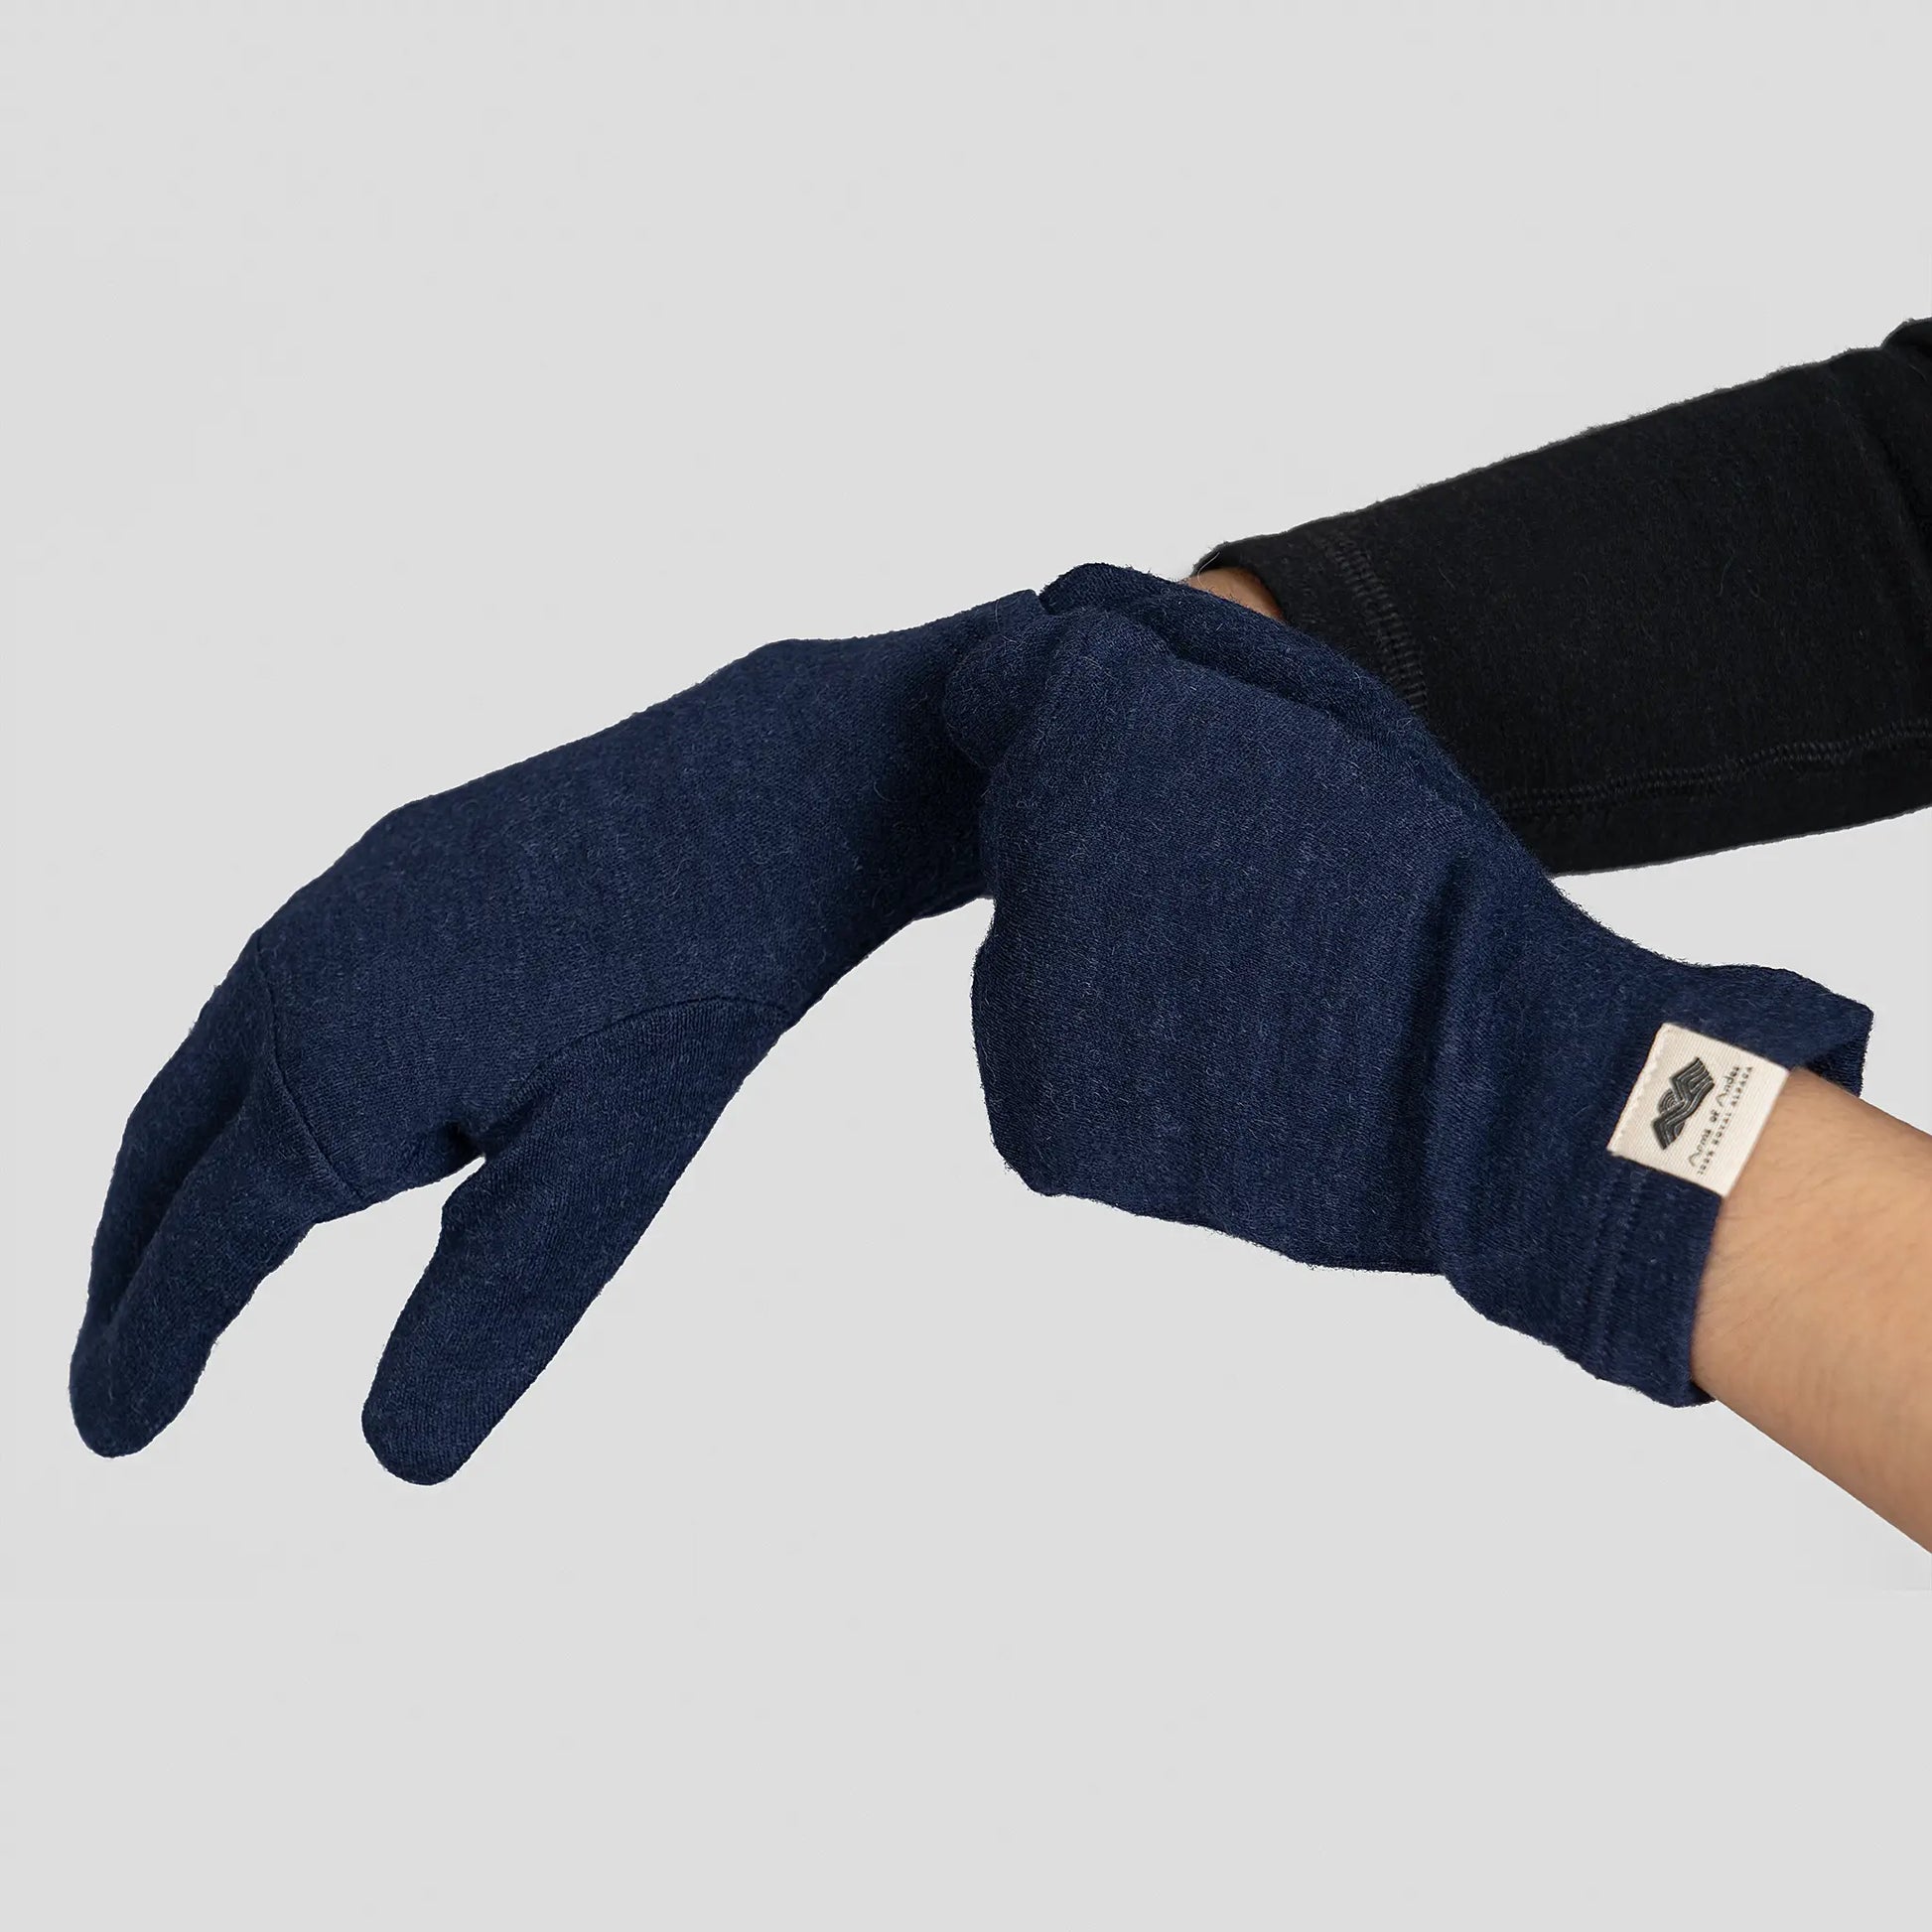 eco friendly gloves lightweight color navy blue